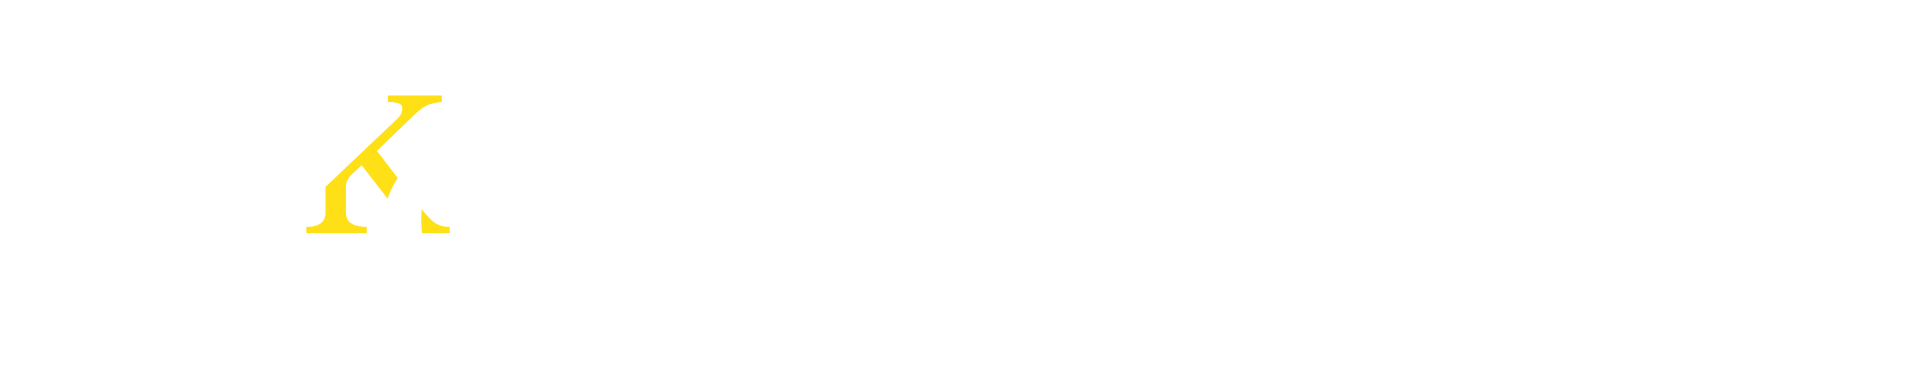 together and ready text graphic